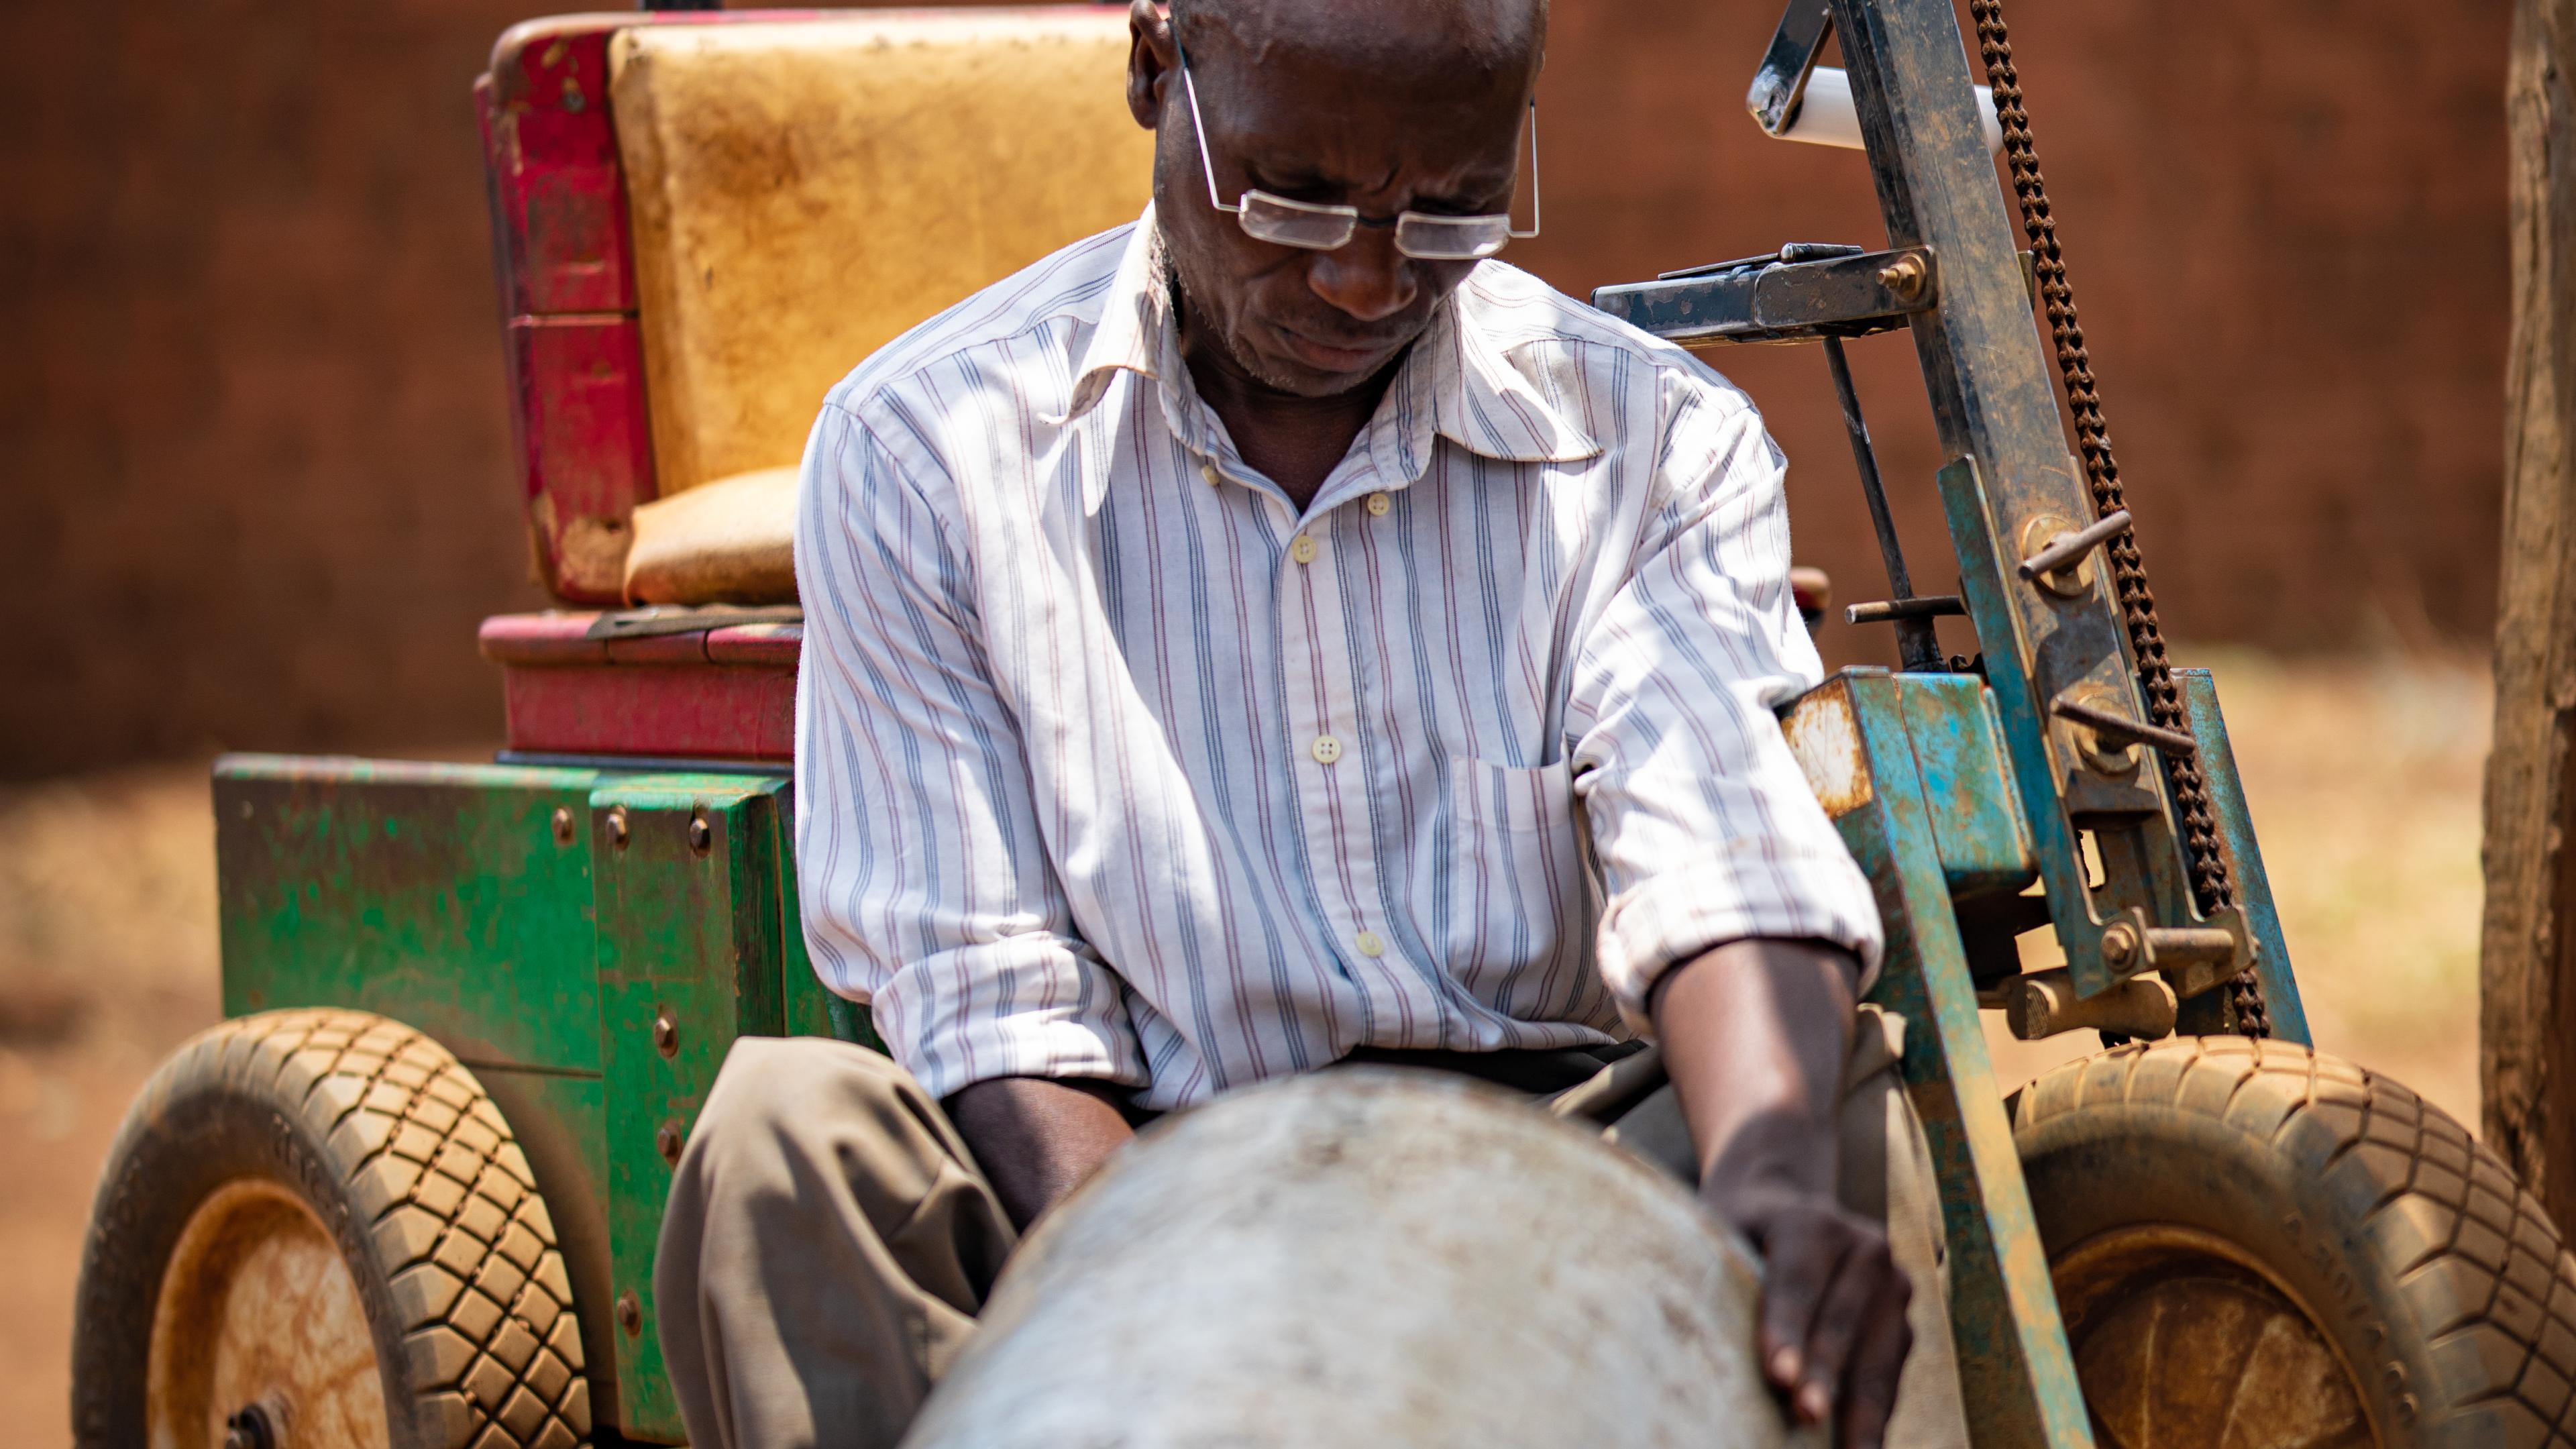 Malawian man with glasses works sheet metal with a hammer